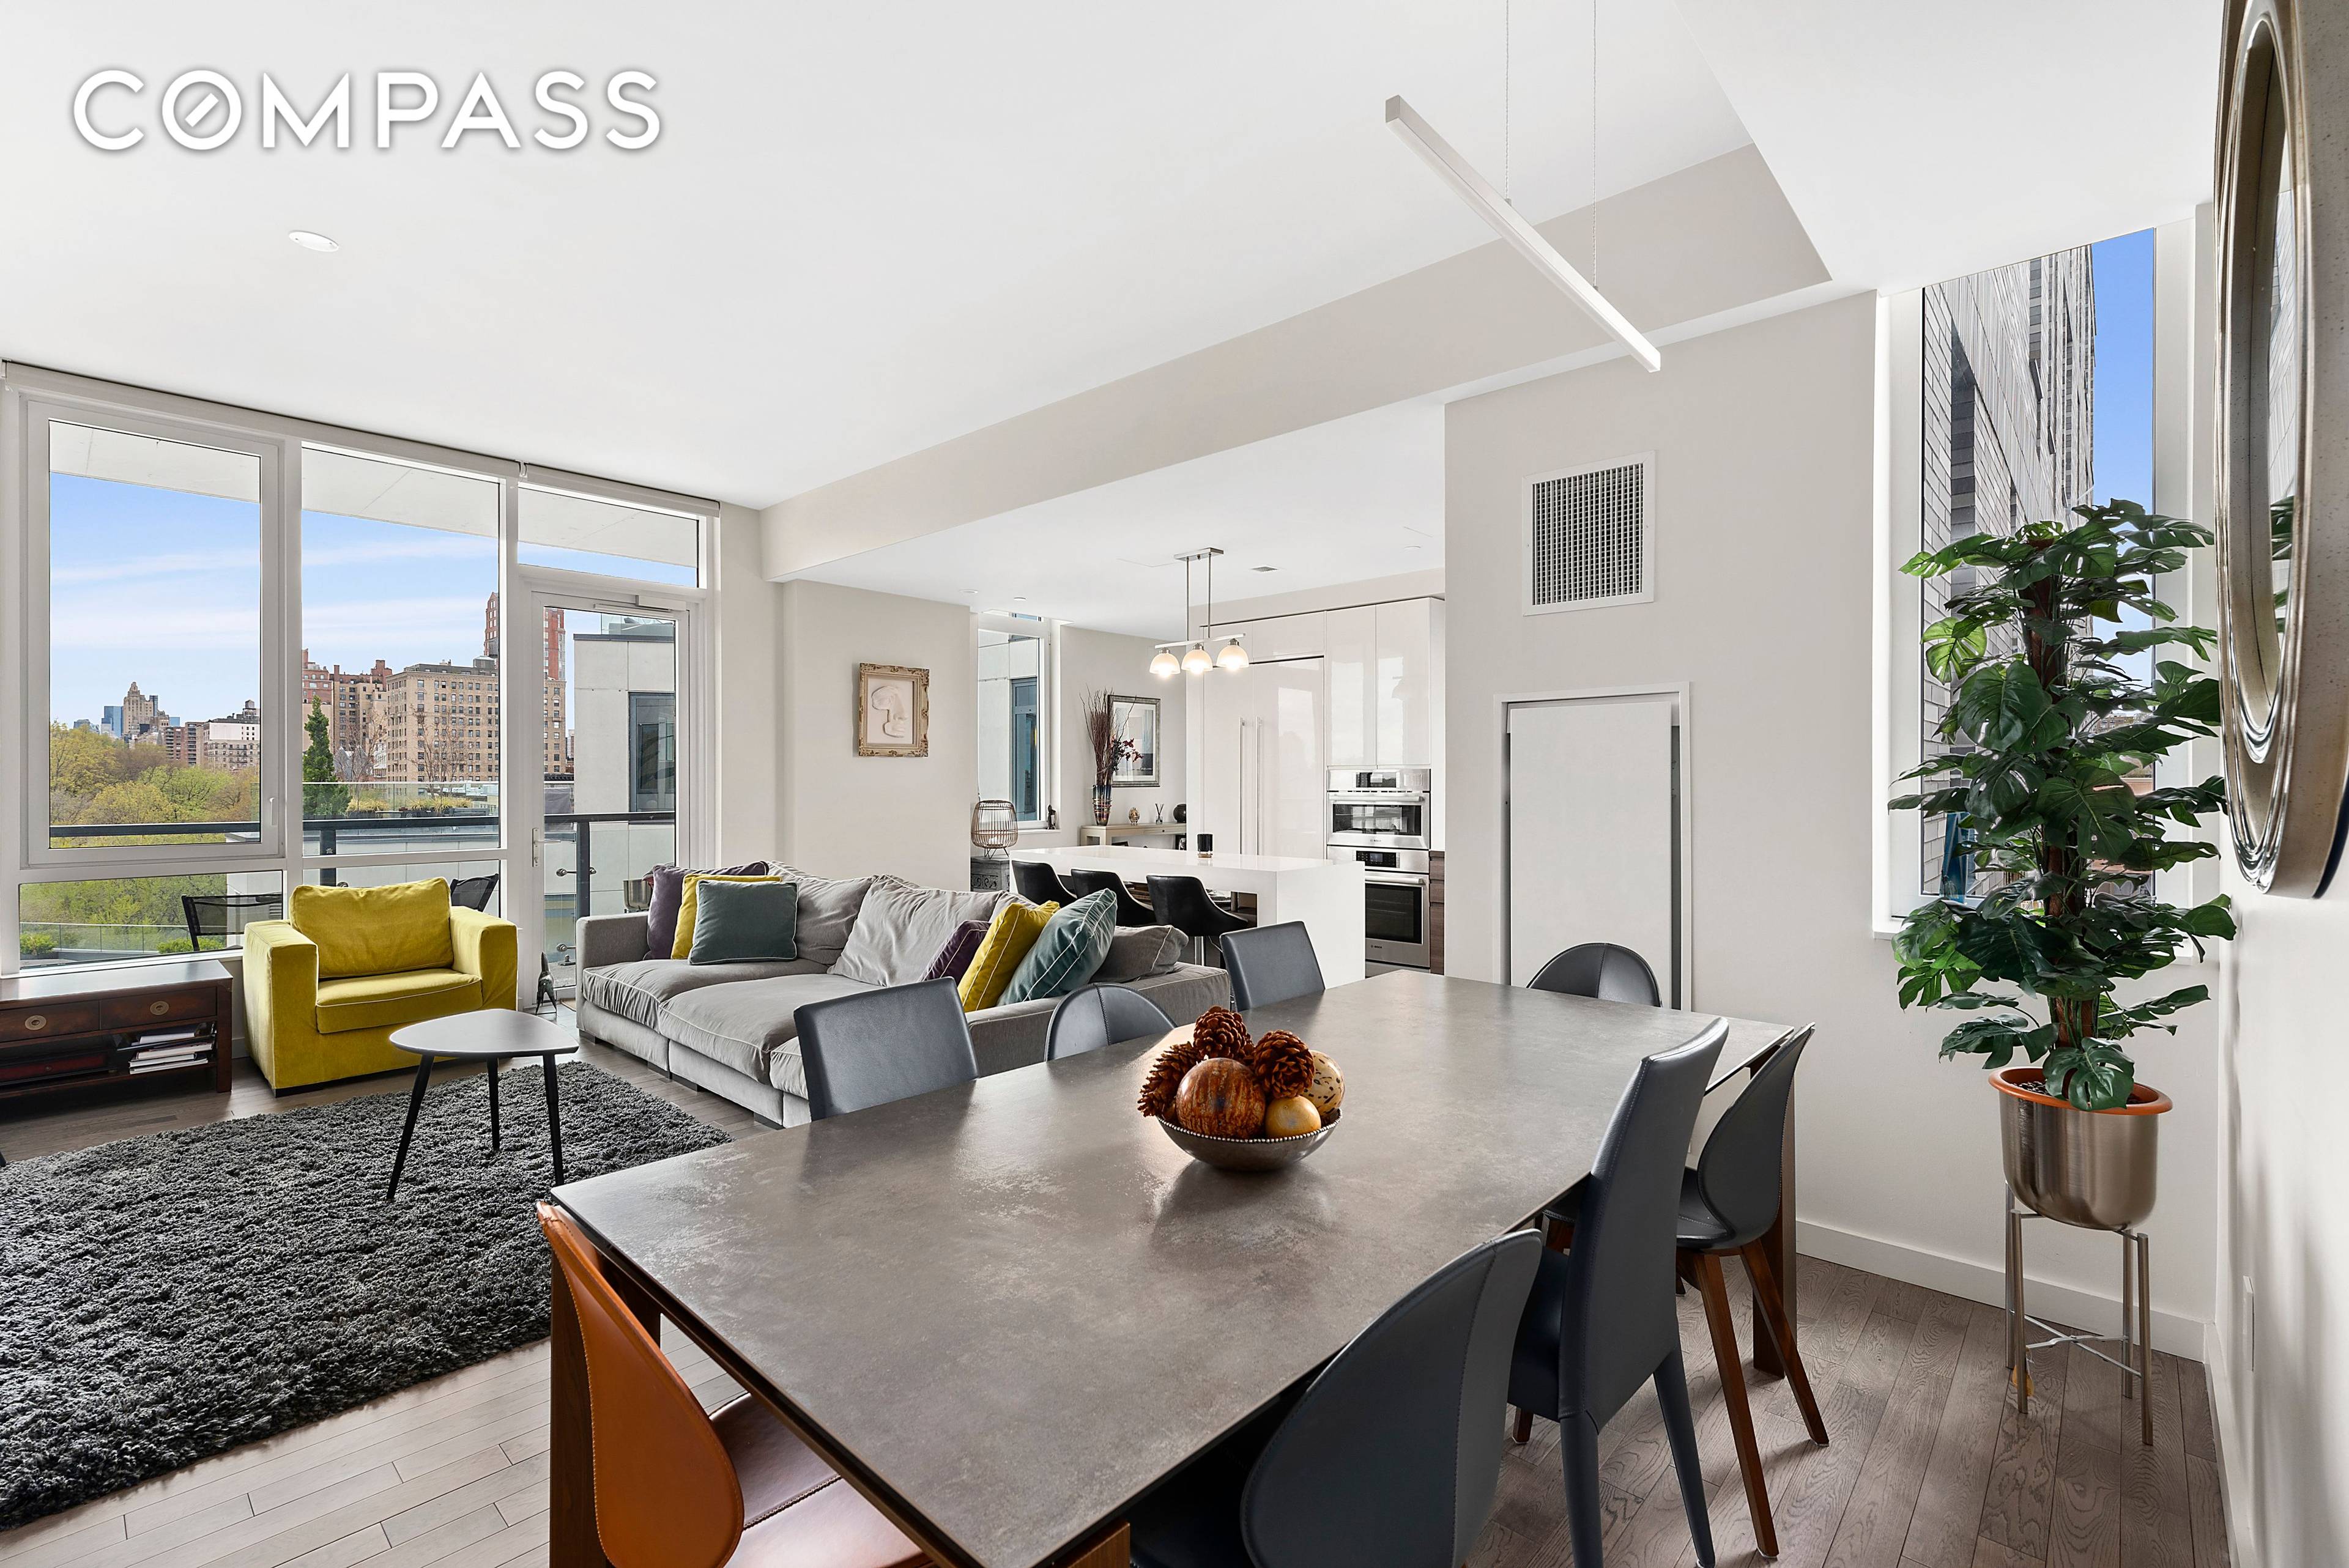 Immediate Occupancy This spacious laid out four bedroom, three bathroom residence enjoys 1, 797 square feet of interior space and a 120 square foot private balcony overlooking Central Park.